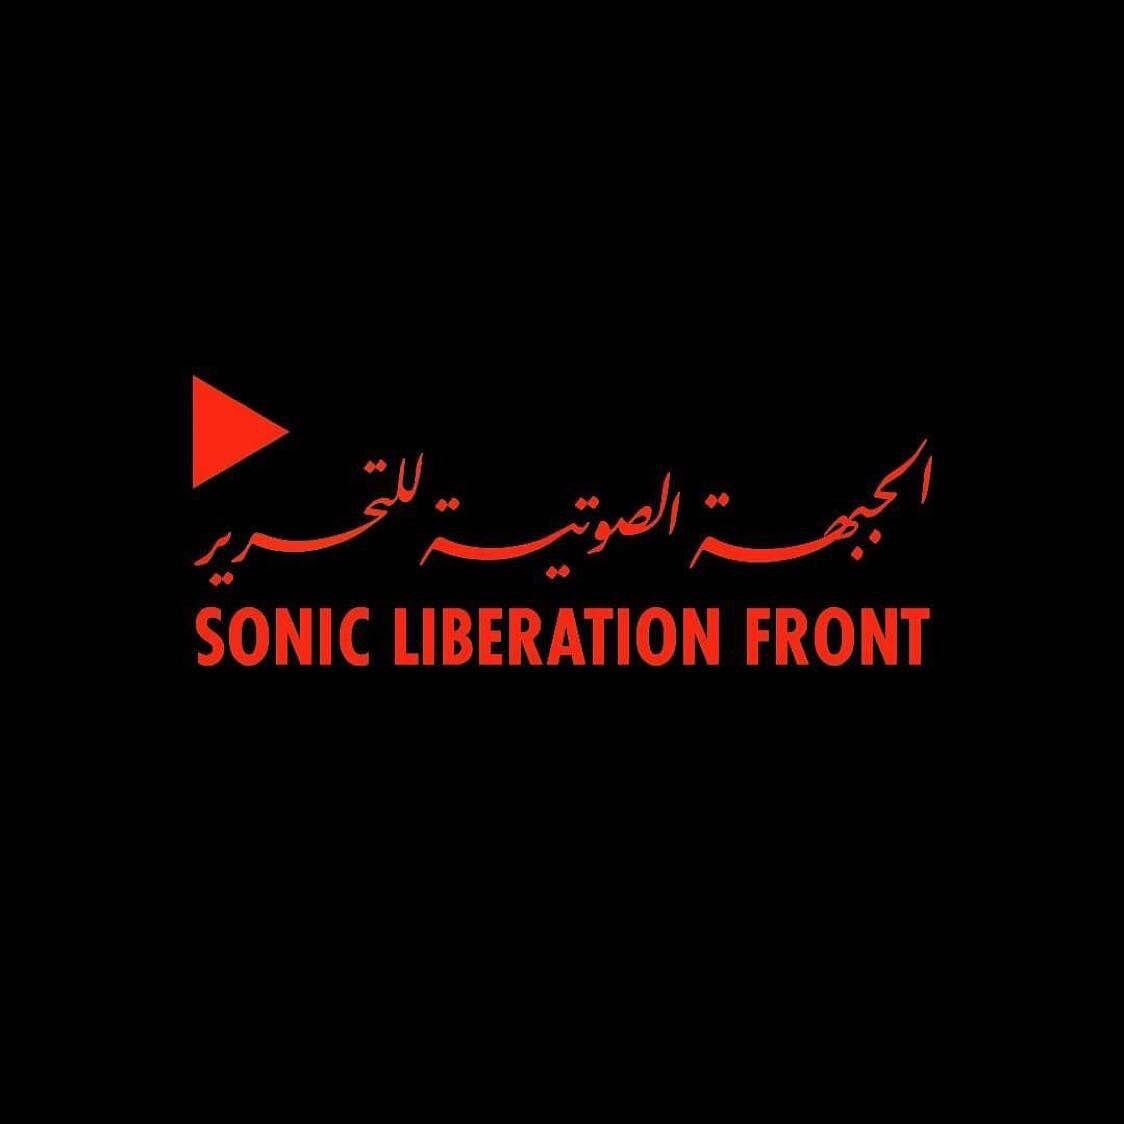 no one is free, until everyone is free. 

My contribution &amp; @nicolasjaar &lsquo;s selections as part of the Sonic Liberation Front are now on @recordat_ &lsquo;s soundcloud page. 

Listen, share and raise awareness to the ongoing oppression of th